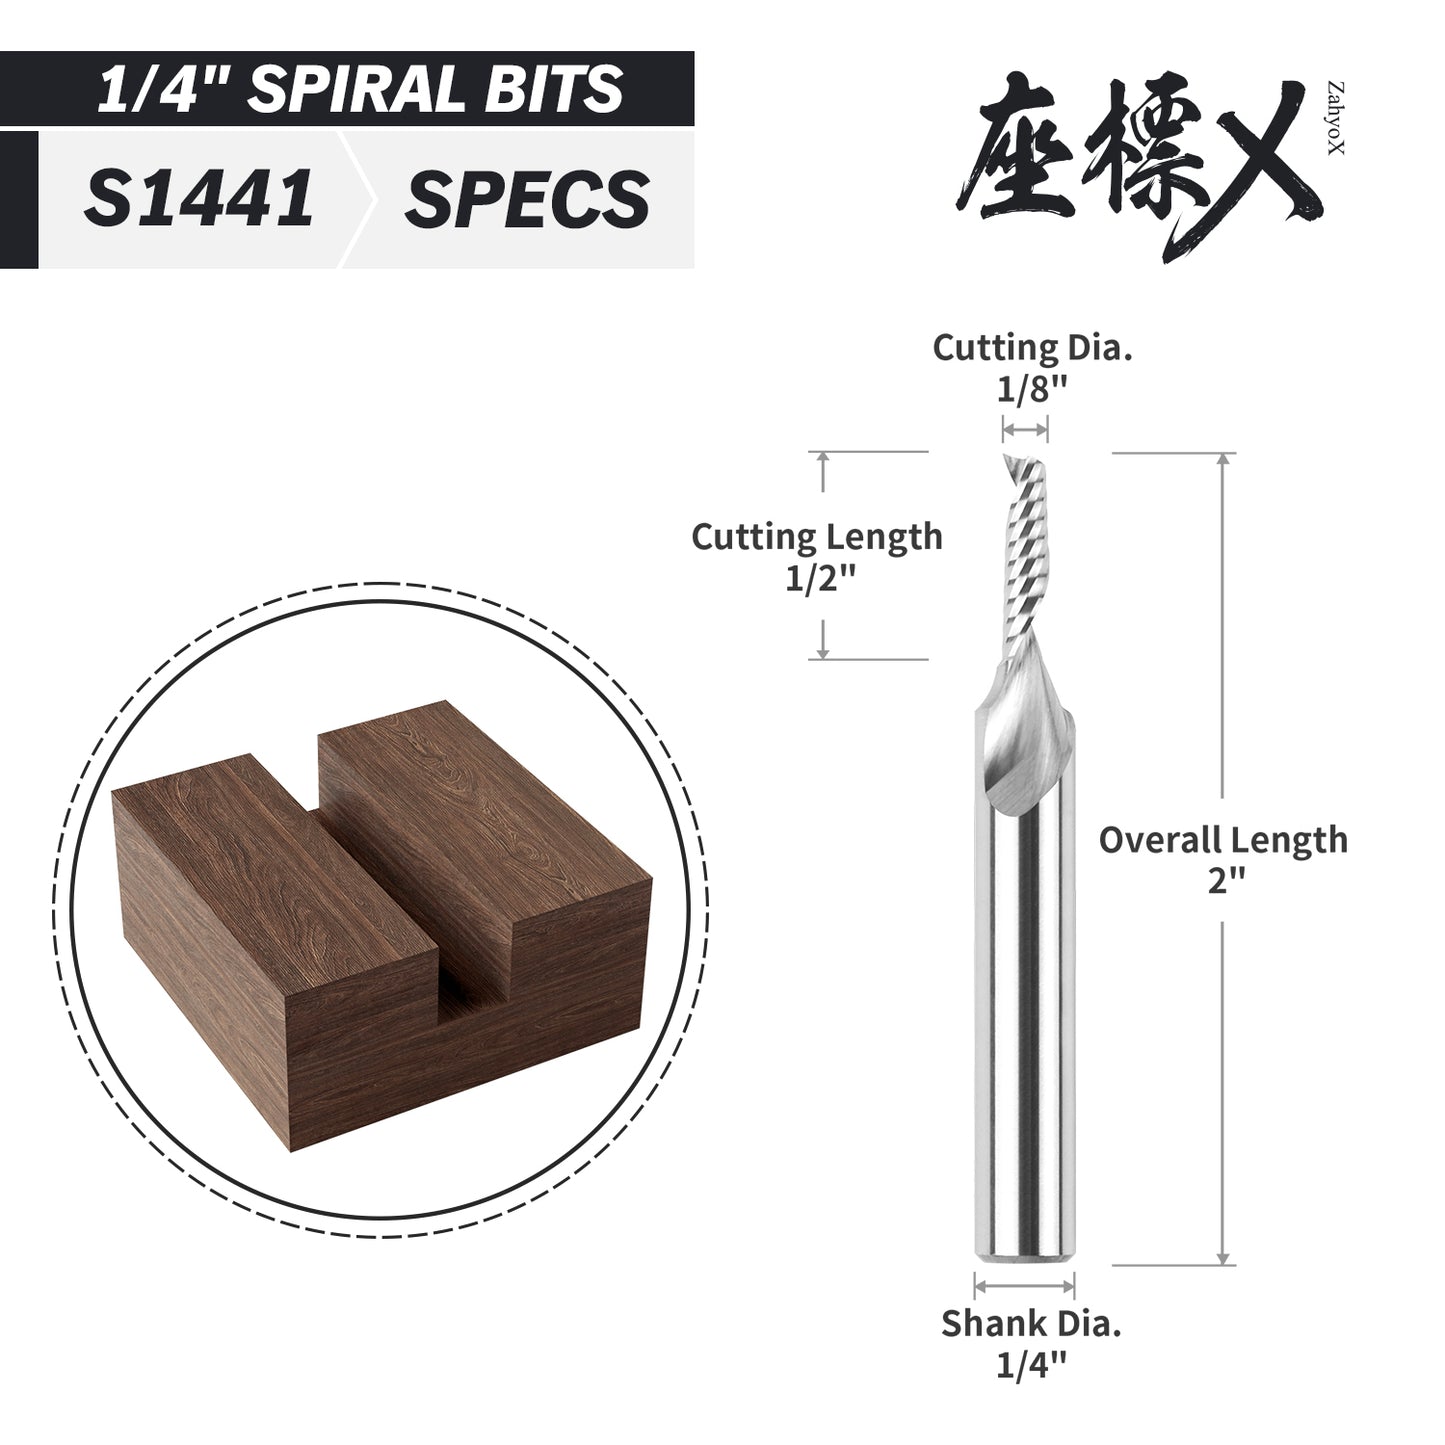 S1441 Solid Carbide Upcut Spiral Router Bit - O Flutes - 1/8 CD - 1/4 SD - 1/2 CL - 2 OL